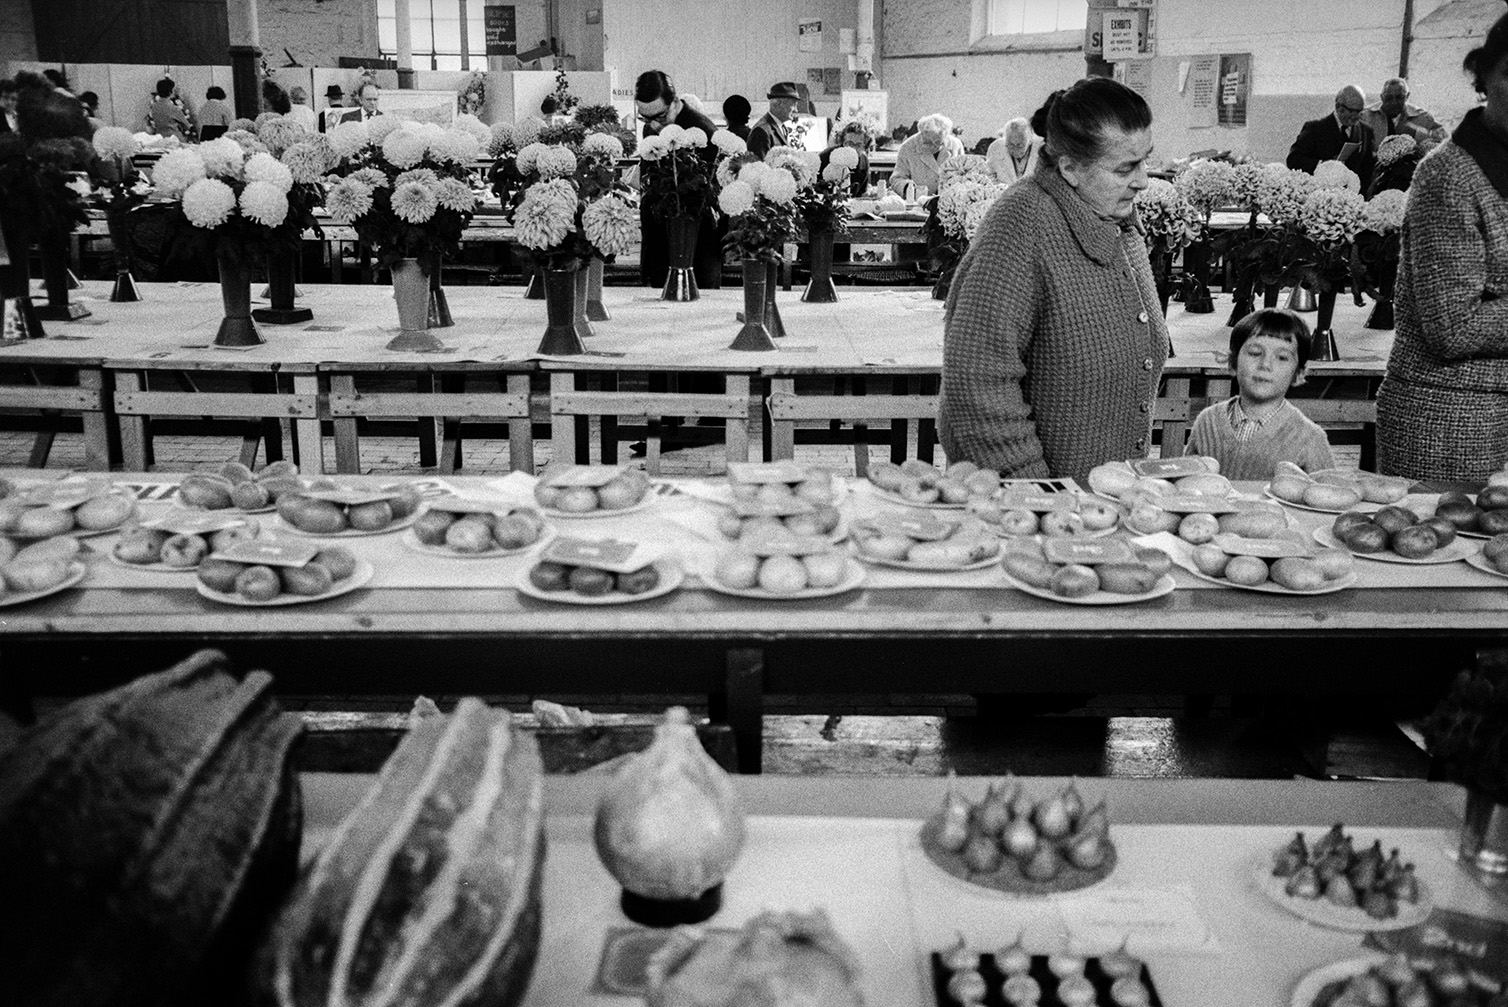 People looking at exhibits at a flower show in Bideford Pannier Market. A woman and child are looking at exhibits of potatoes. Vases of dahlias are displayed in the background and a marrow can be seen in the foreground.